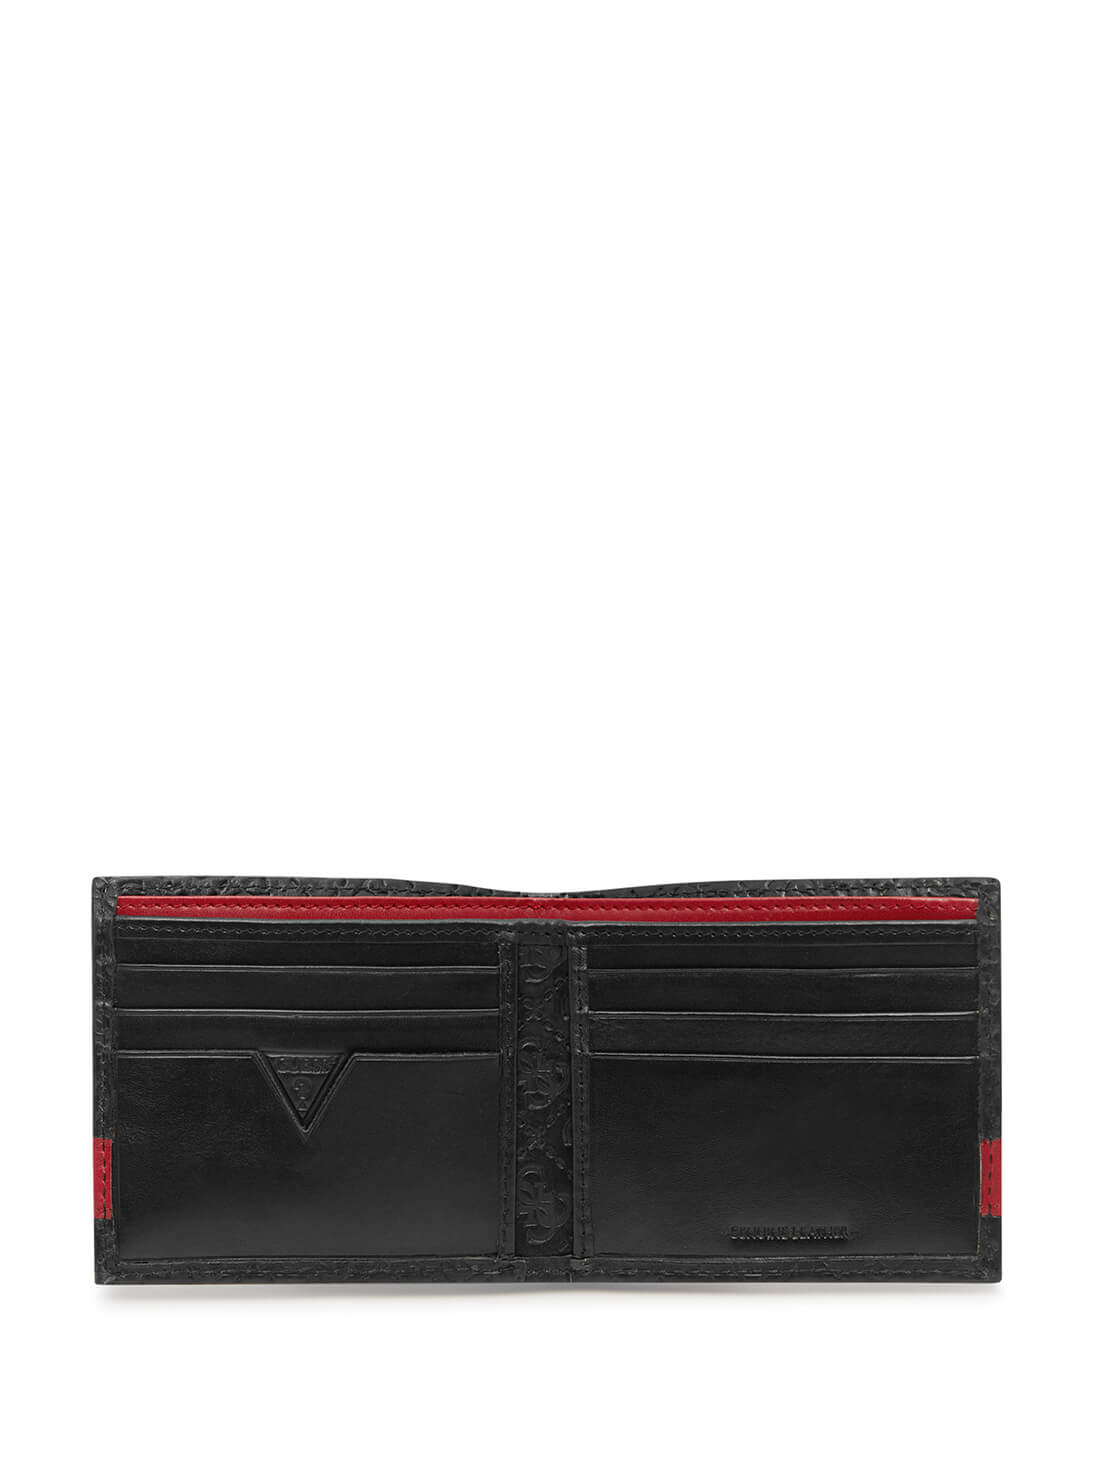 GUESS Men's Red Black Quattro G Slimfold Wallet 31GUE13215 Inside View